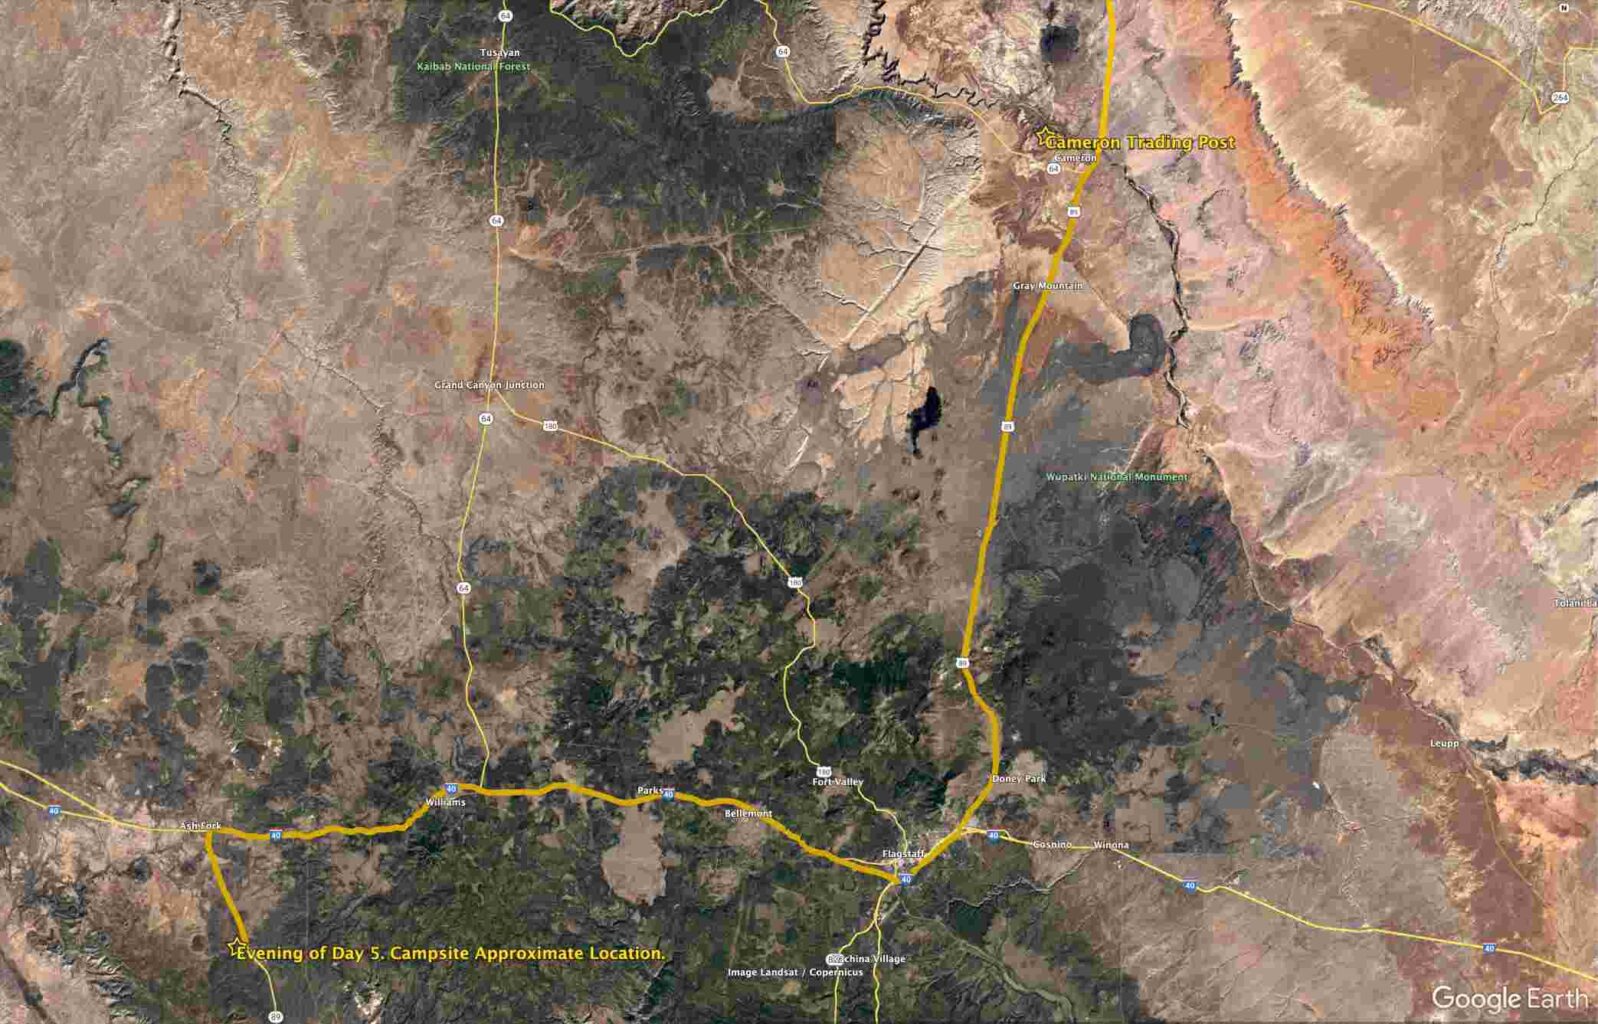 Image: map from Cameron to the south of Ash Fork